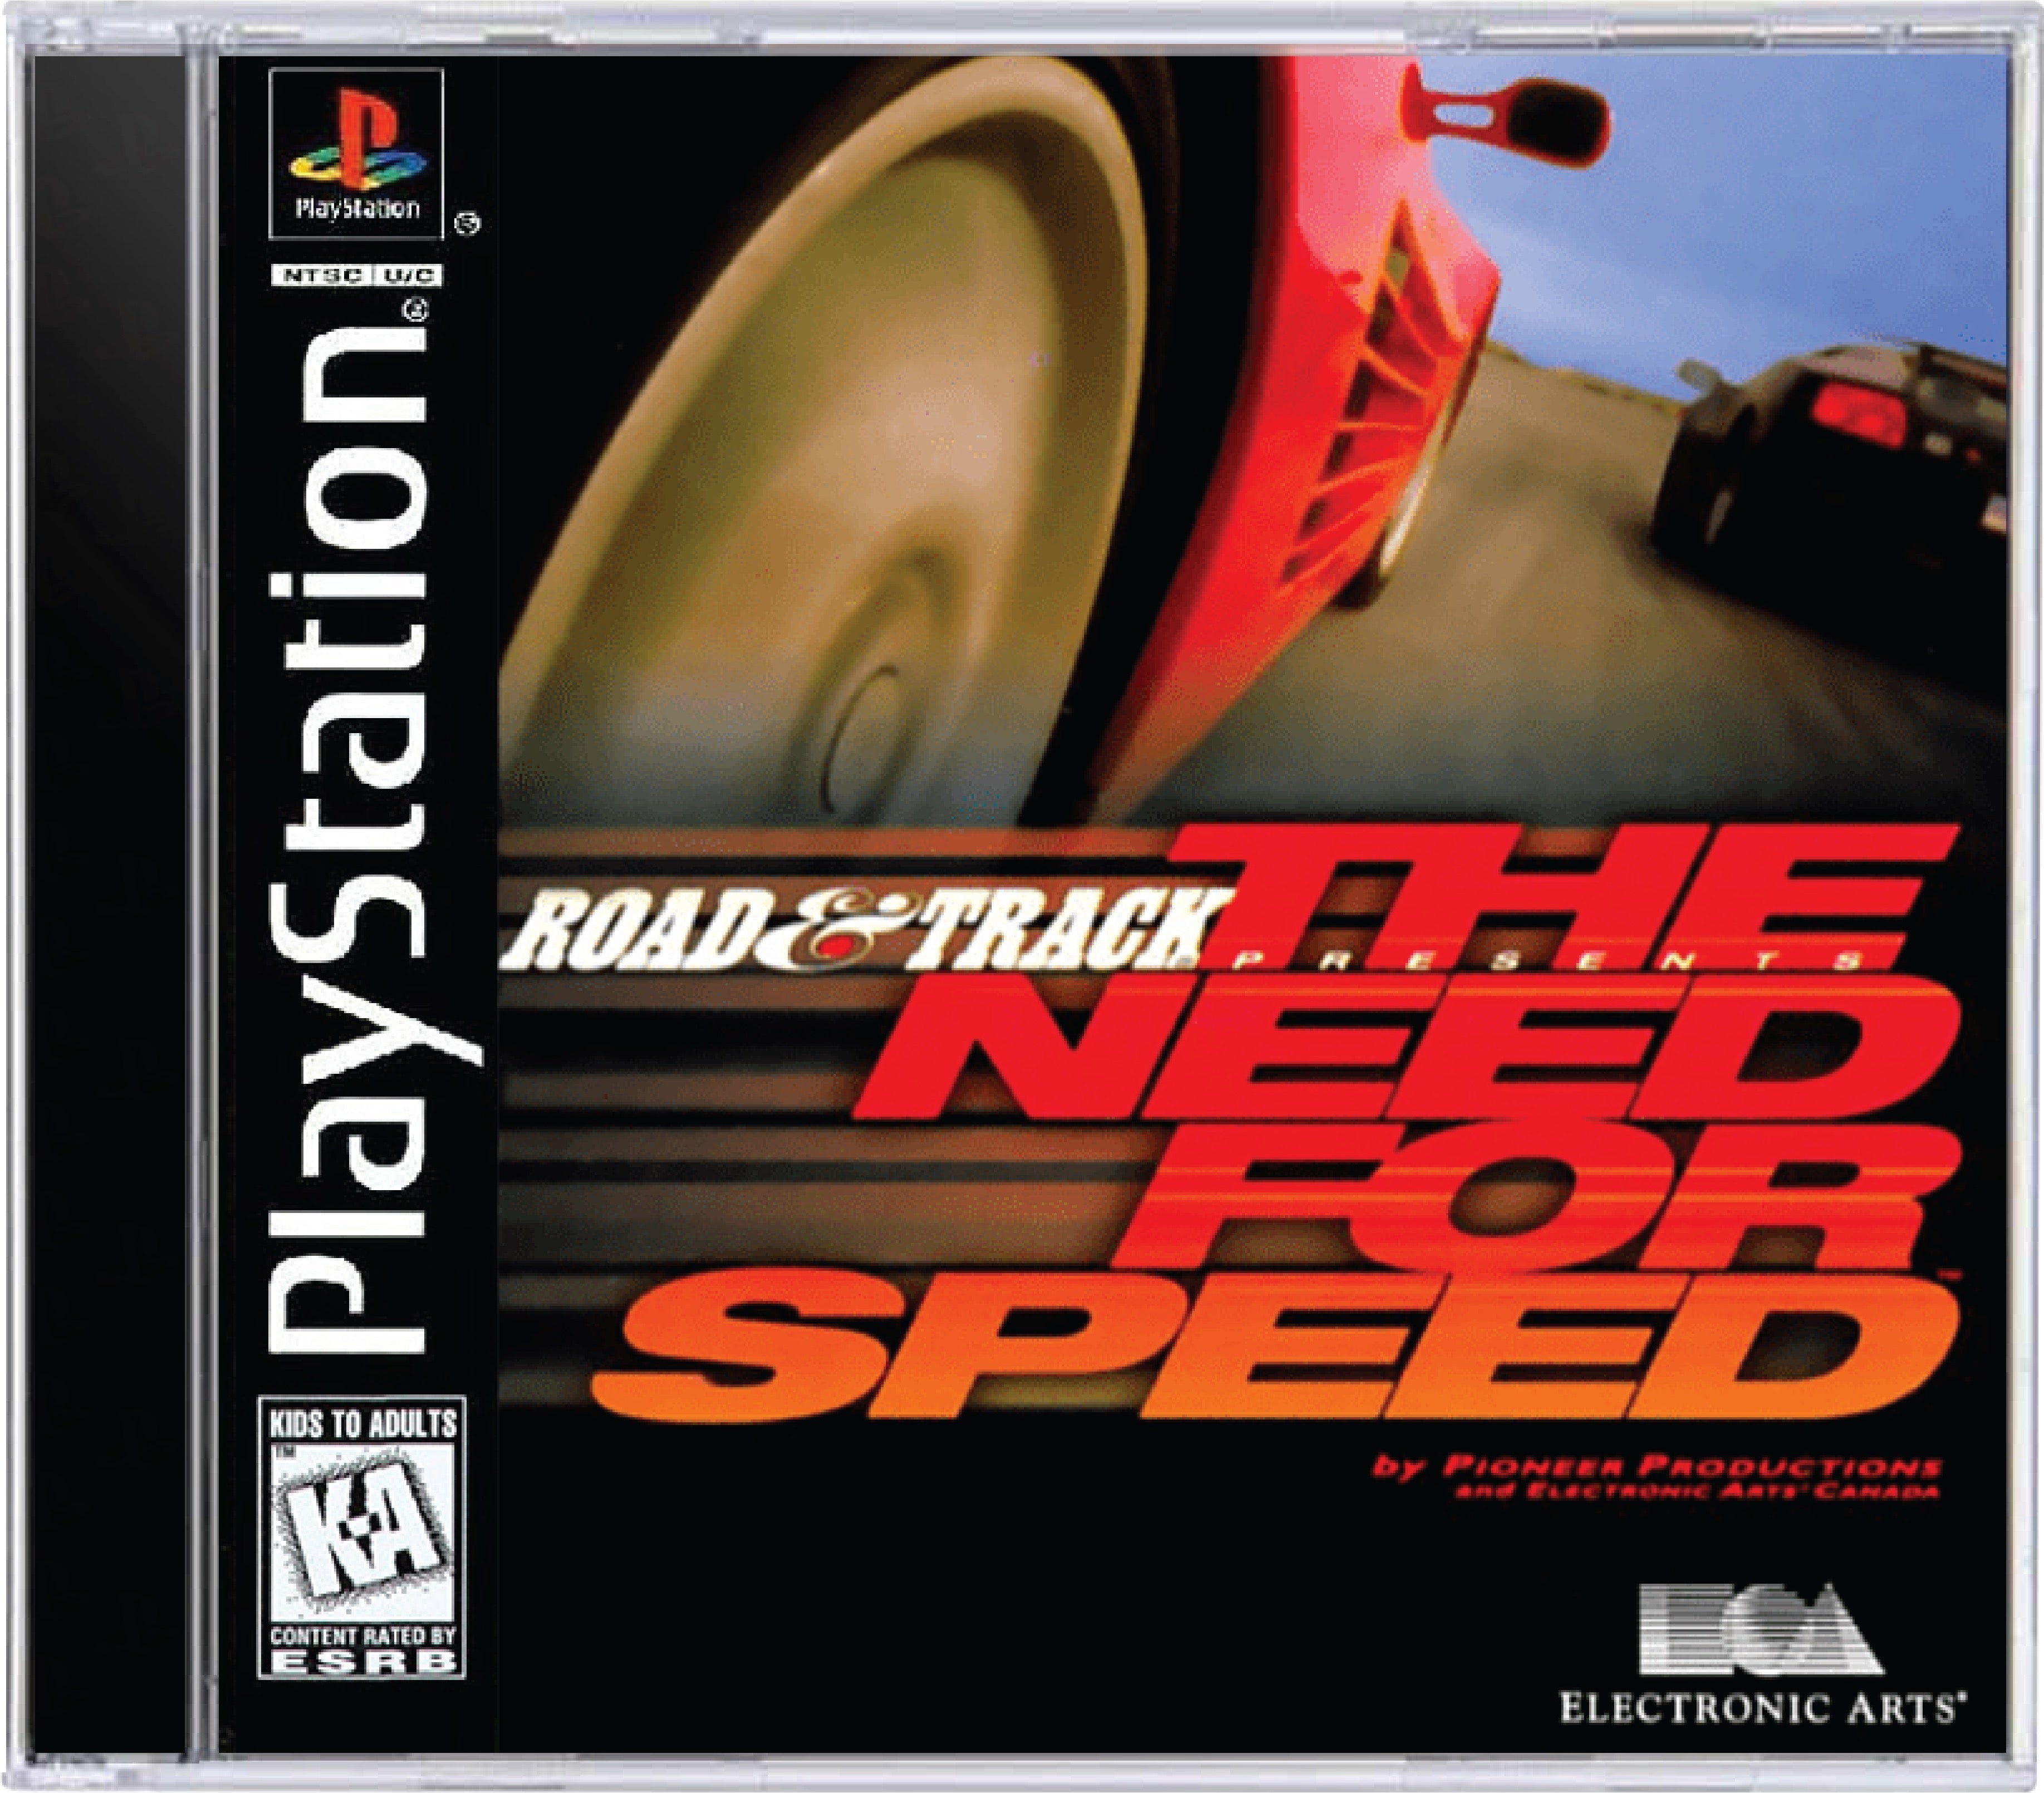 The Need for Speed Cover Art and Product Photo